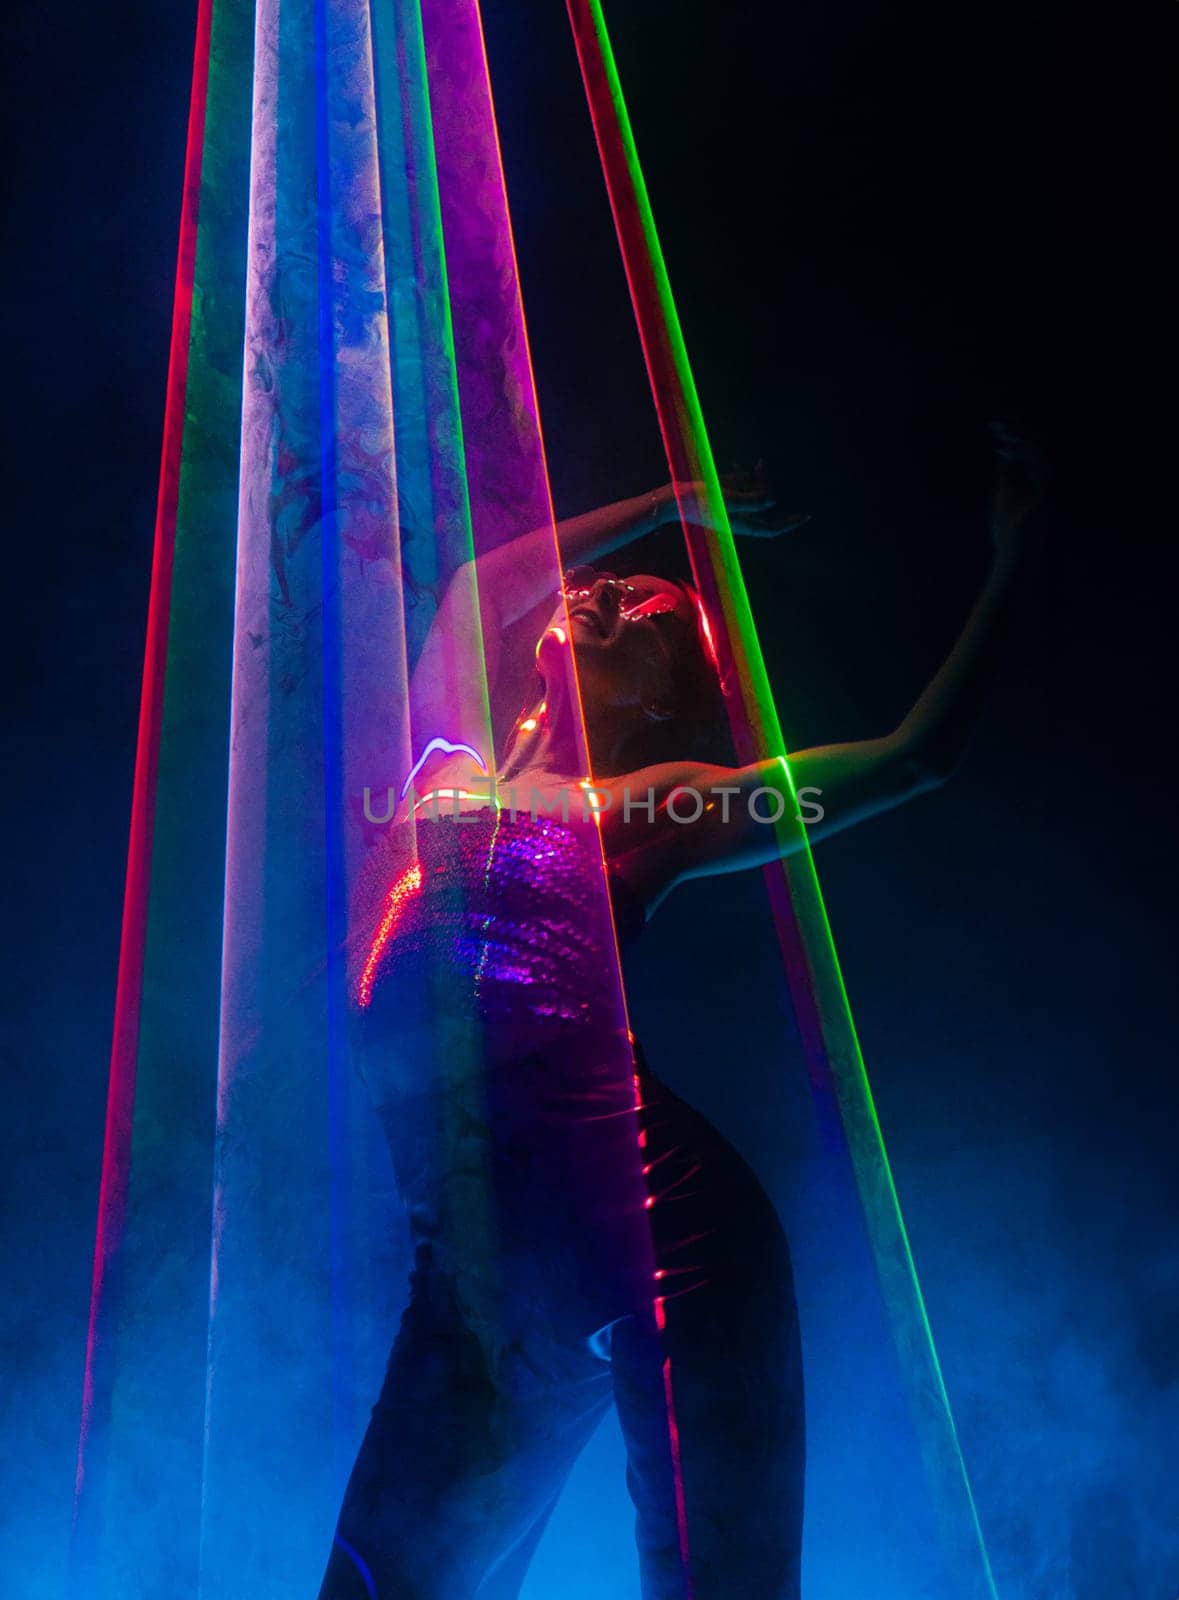 Beautiful woman dancing under colorful illumination, laser light, neon party night club. Performance, projection mapping. Interactive exposition installation, Optical and visuals concept. High quality